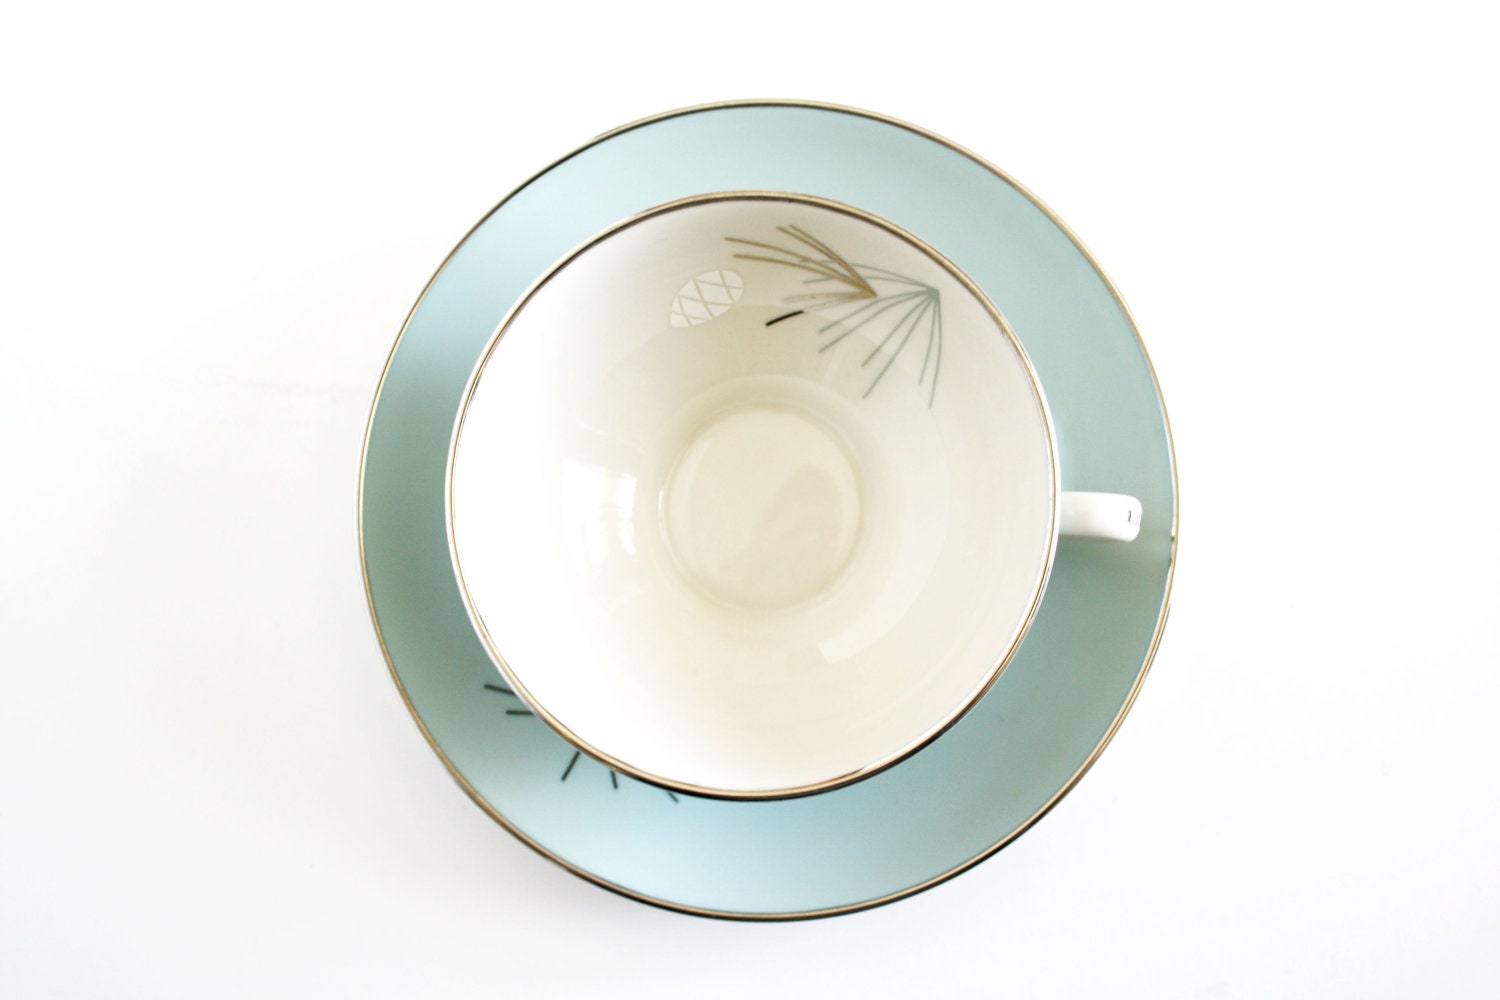 Franciscan cup and saucer, Silver Pine pattern, light blue off white. - EclecticBlueVintage